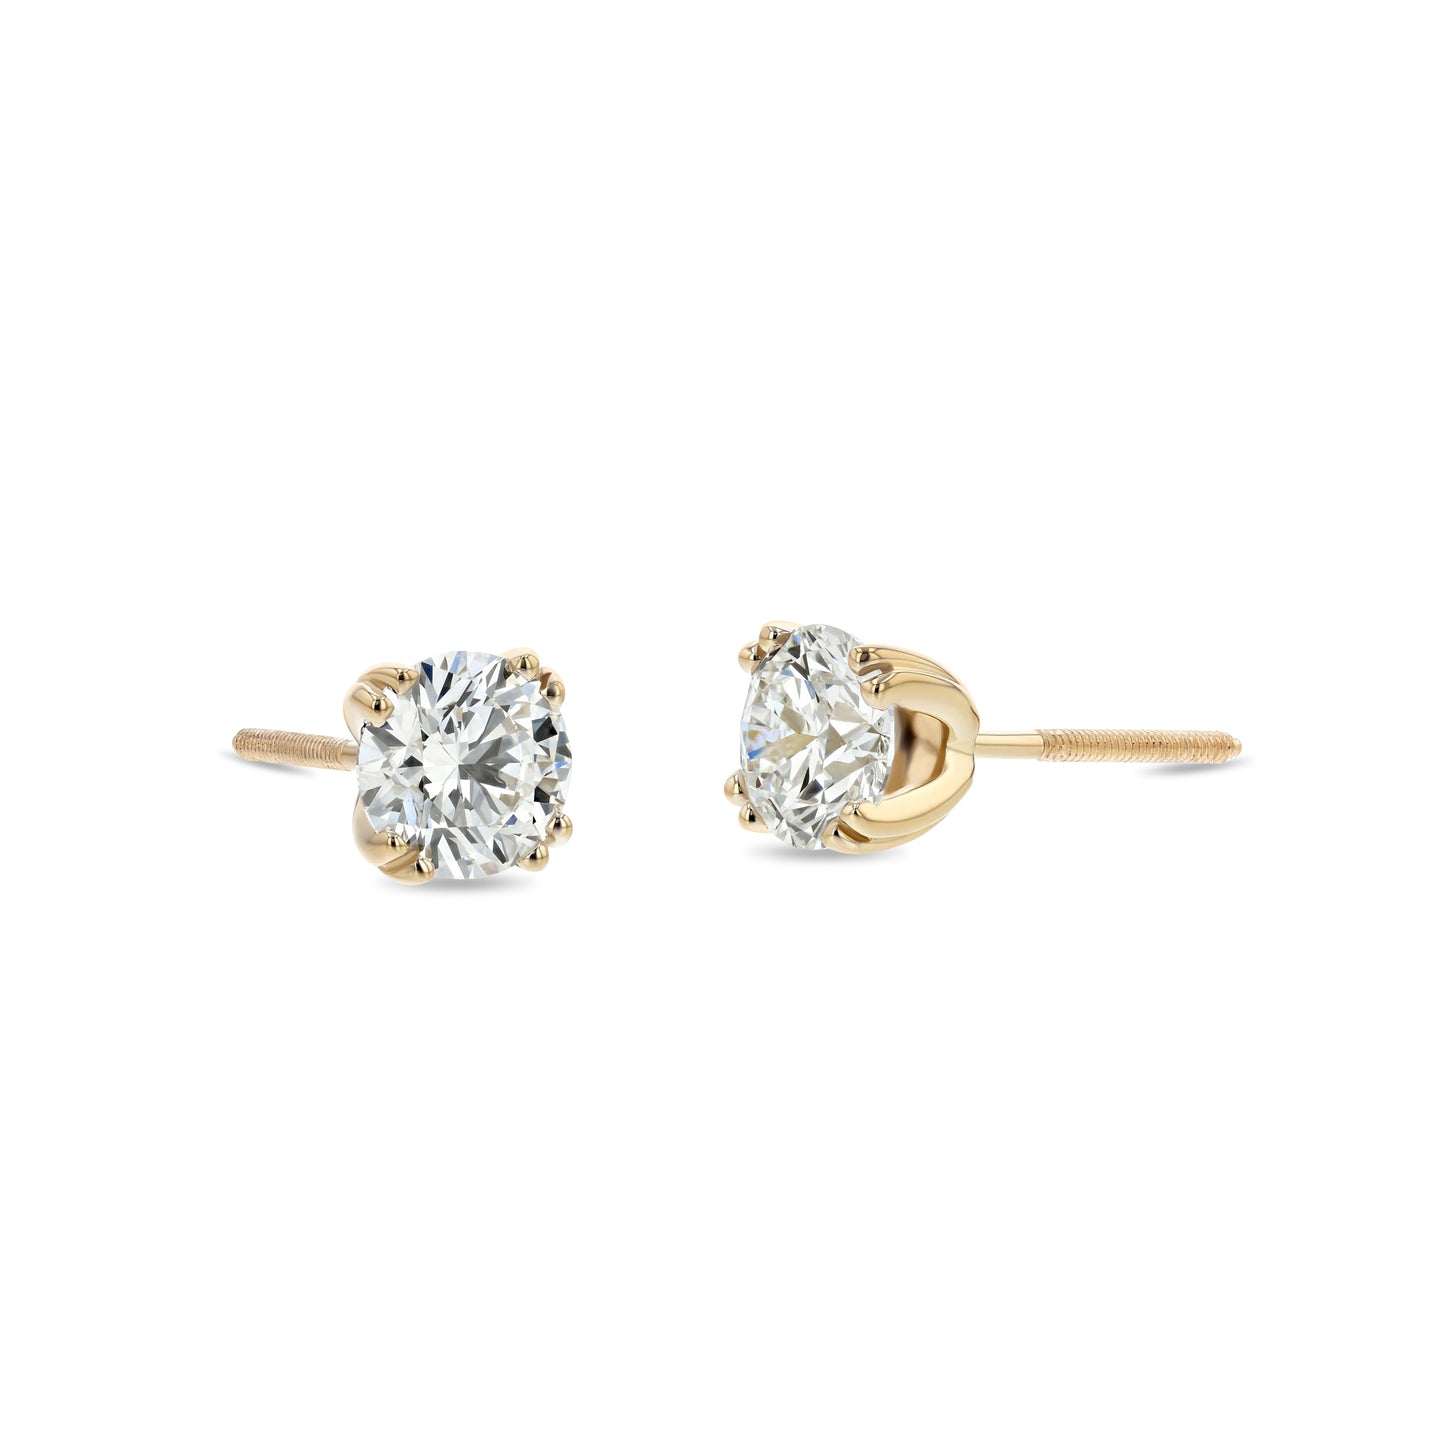 18k Yellow Gold Double Prong Round Diamond Stud Earrings 1ctw (5.2mm Ea), G Color, Si3 Clarity